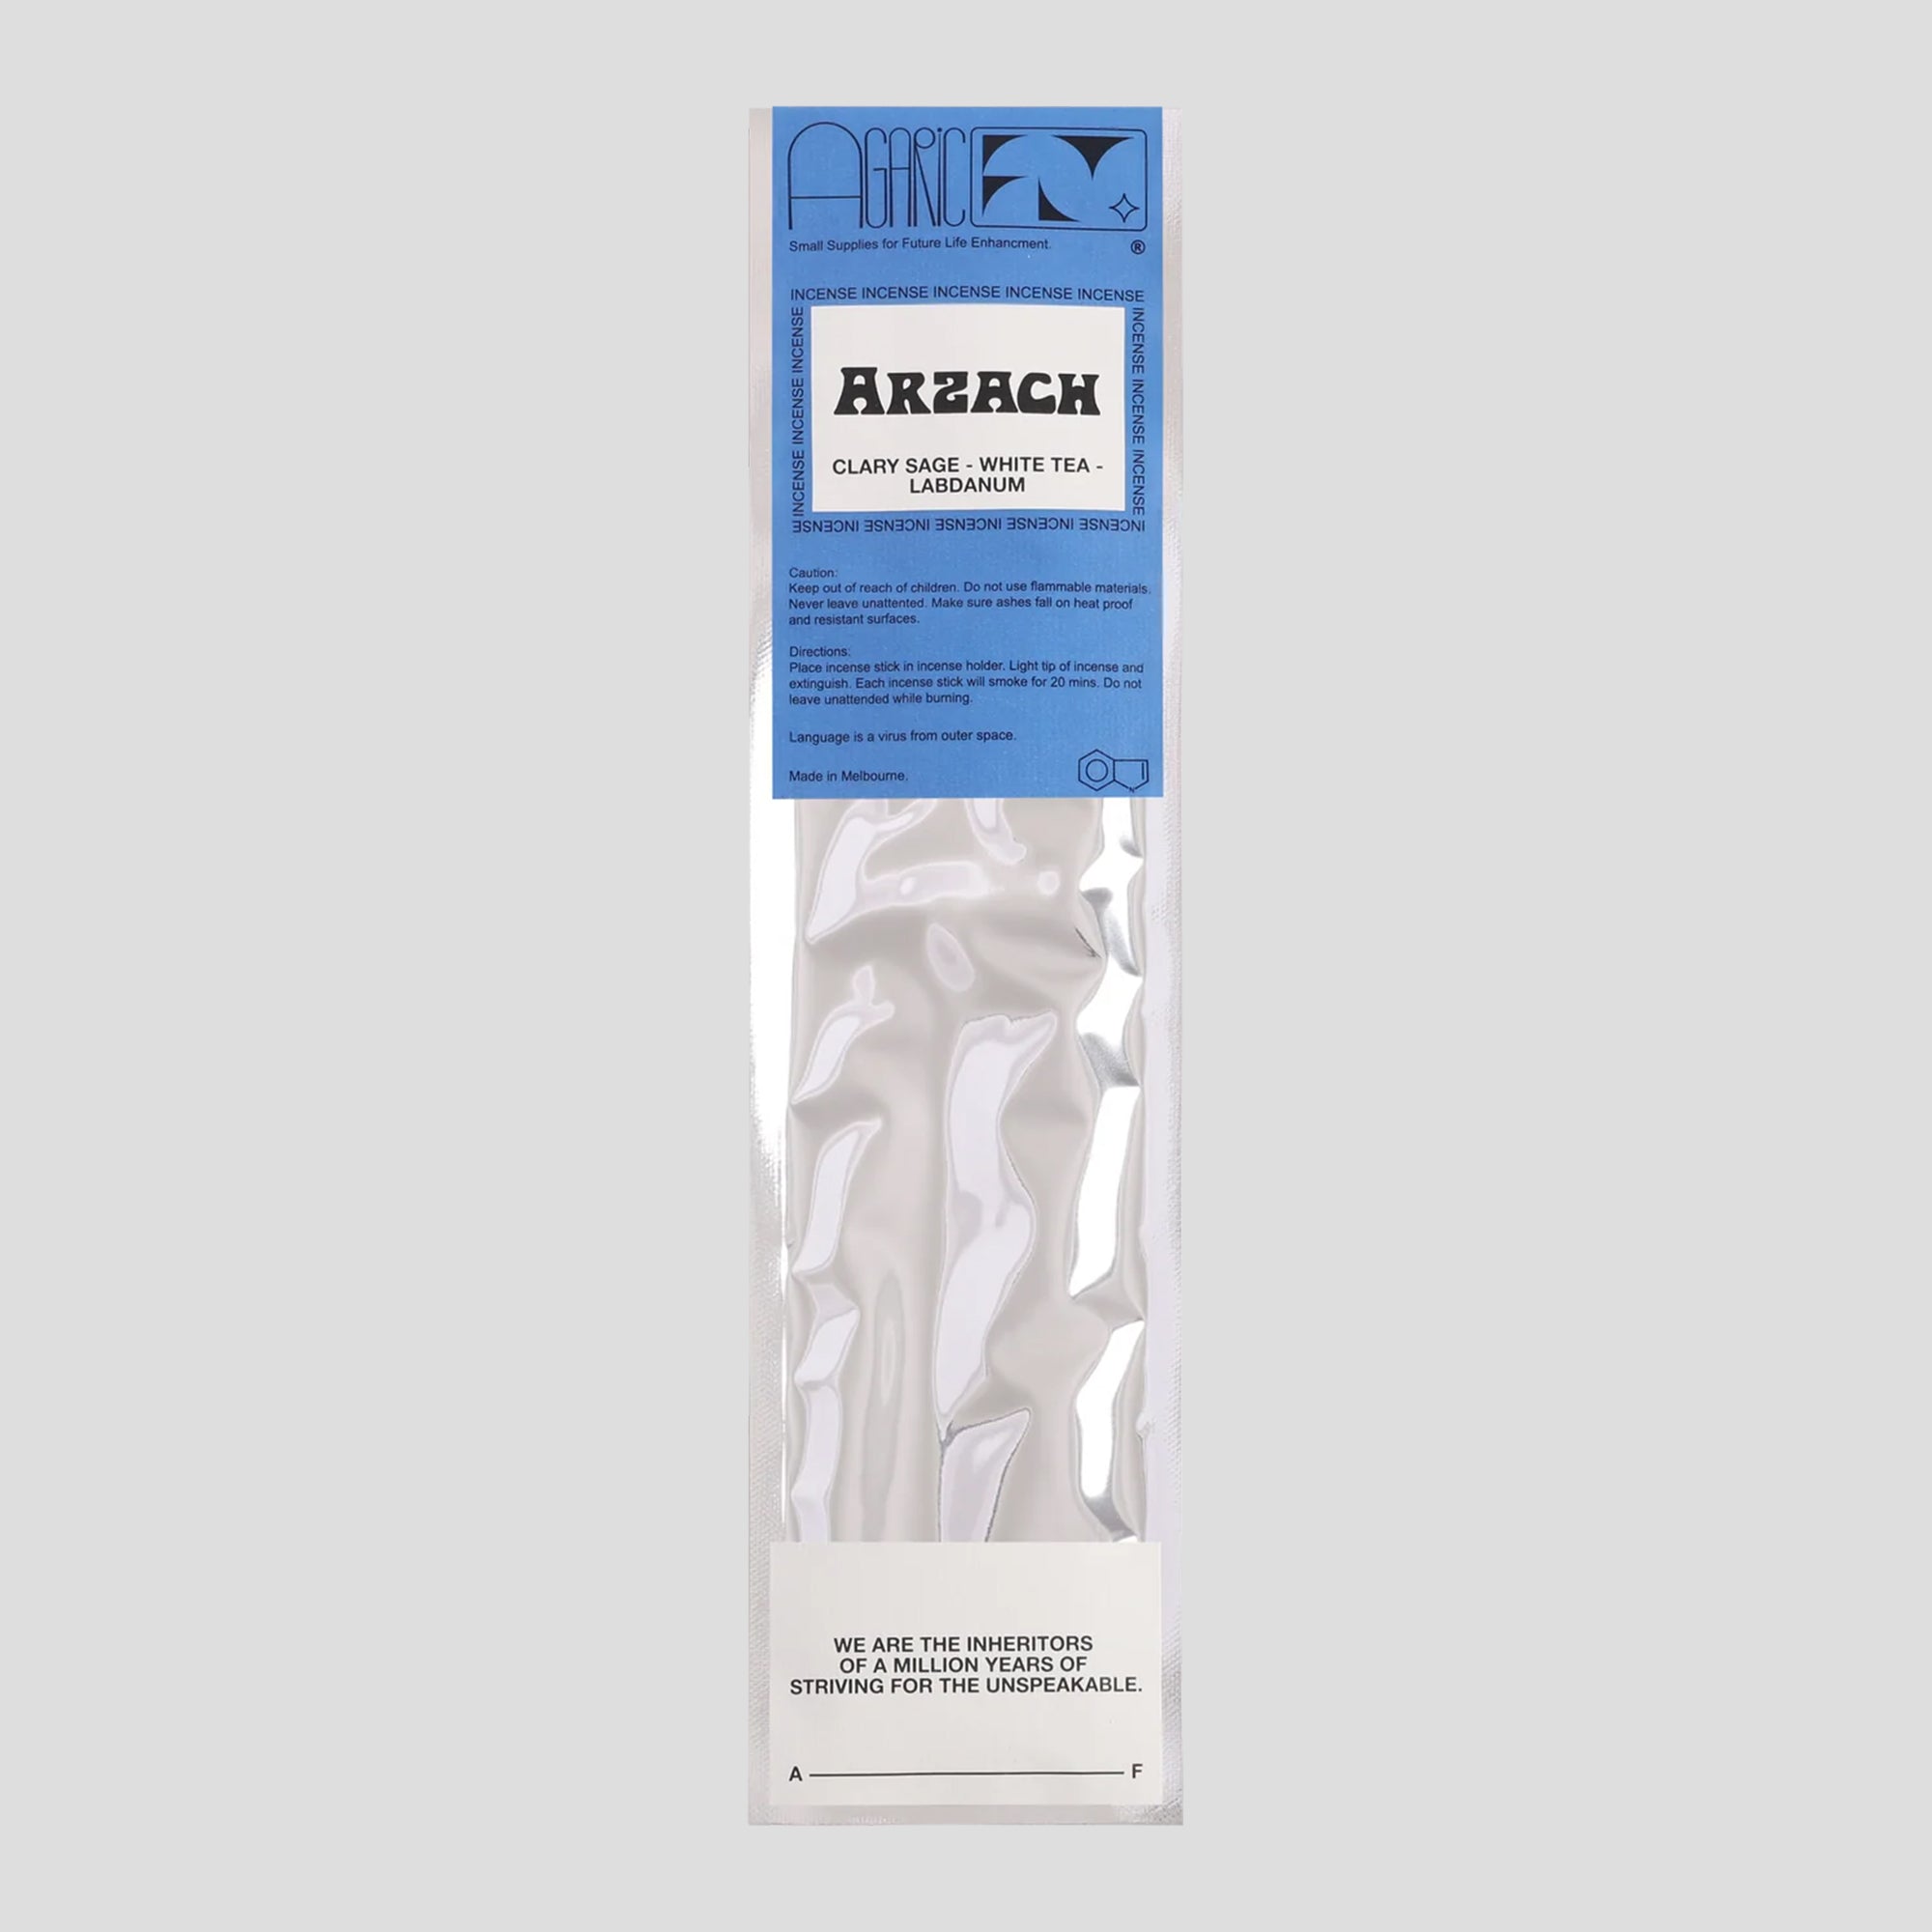 Agaric Fly Arzach Incense Stick